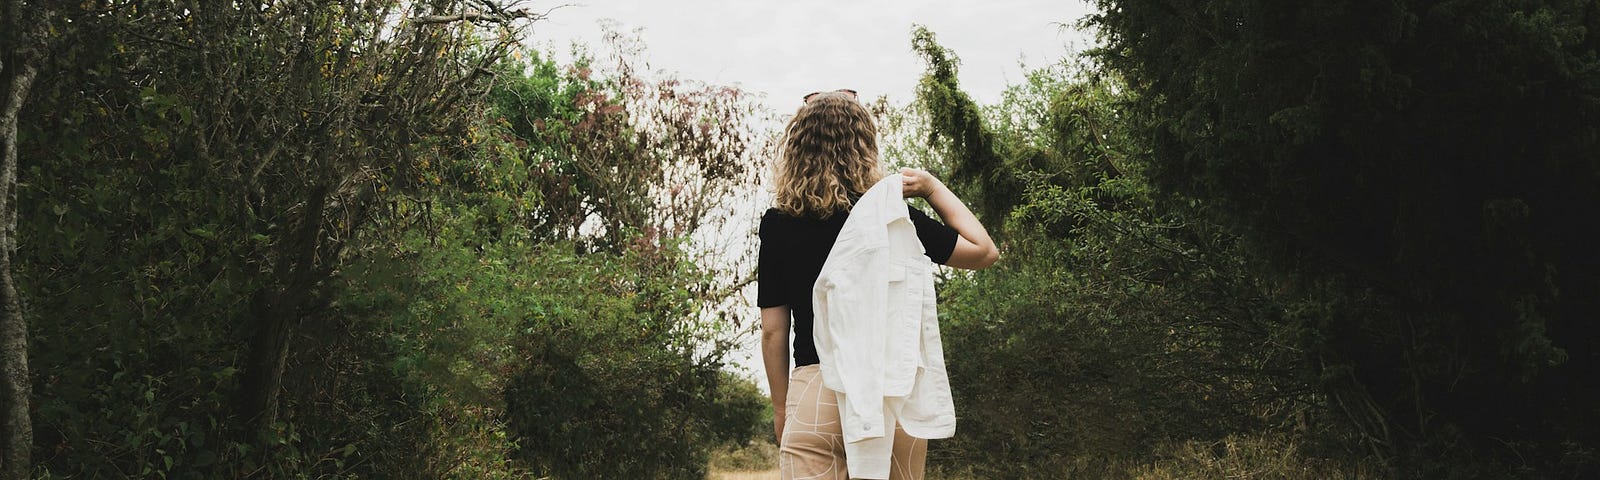 Back of a woman carrying a white dress shirt over her shoulder and walking down a dirt path surrounded by trees.